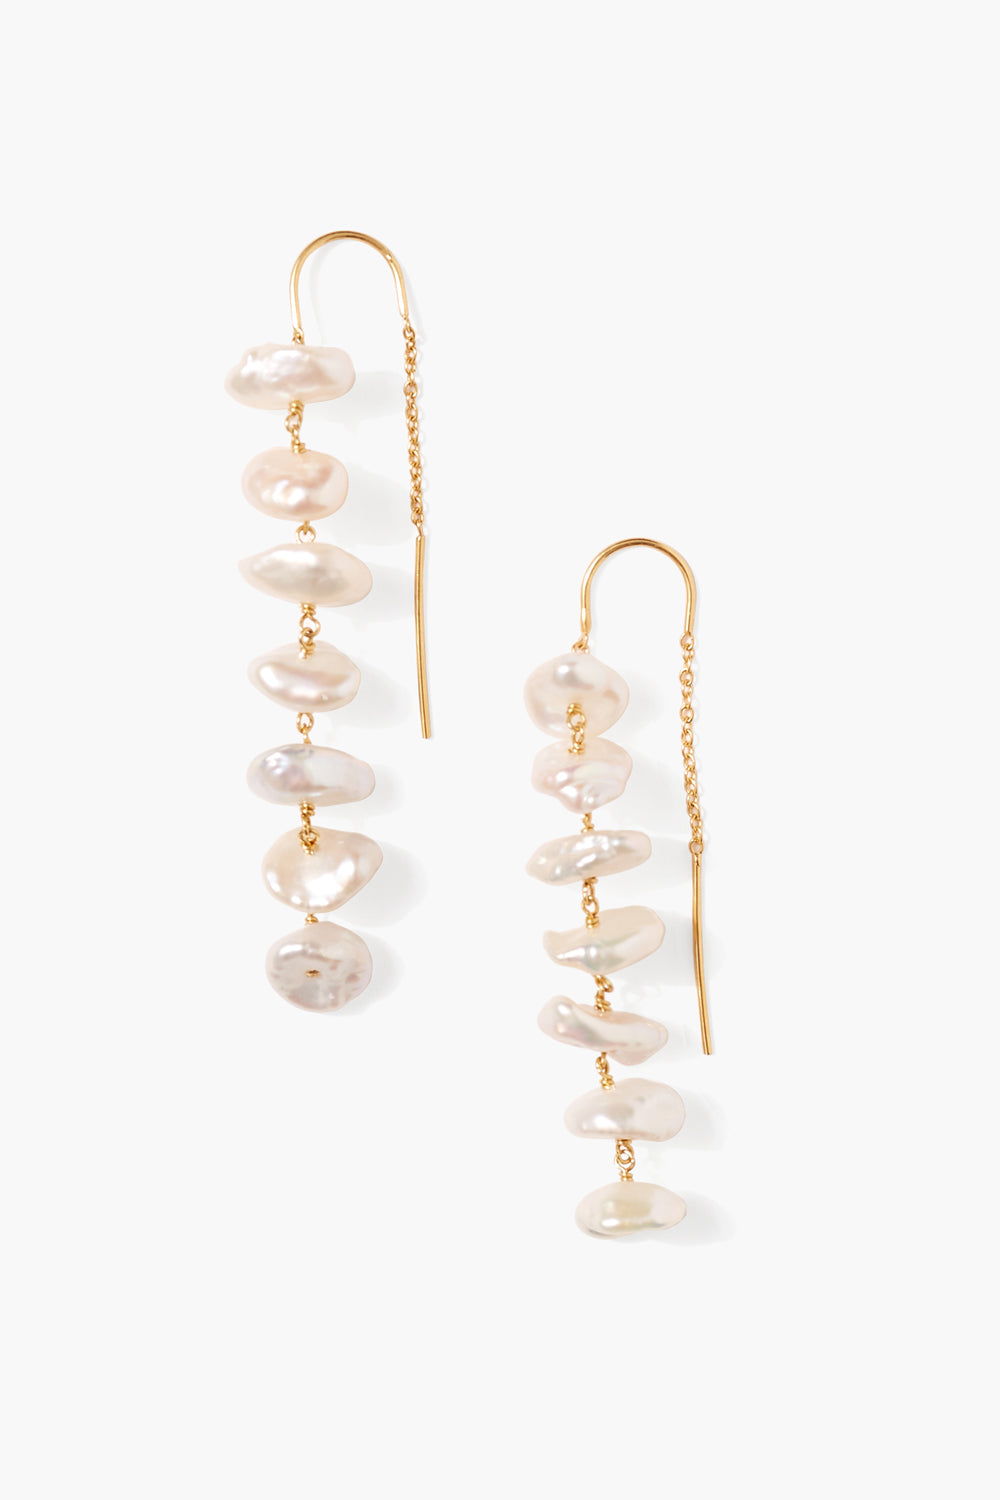 WHITE PEARL THREADER EARRINGS-GOLD - Kingfisher Road - Online Boutique